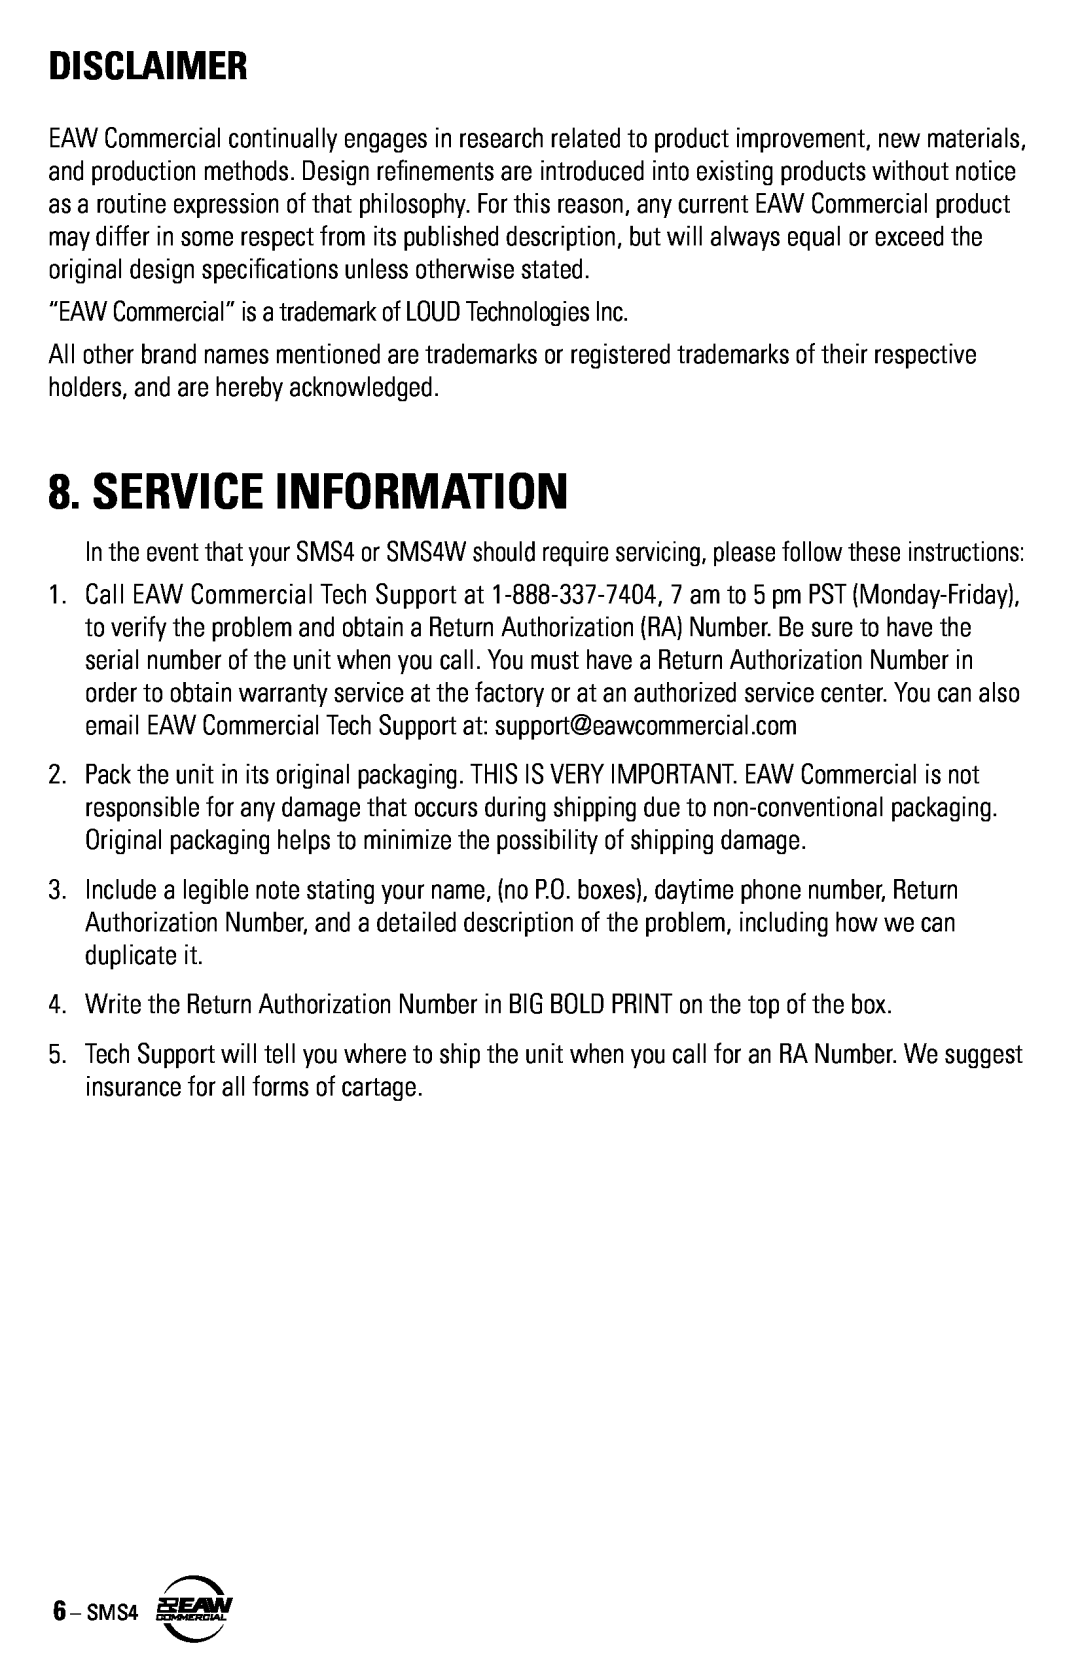 EAW SMS4 instruction manual Service Information, Disclaimer 